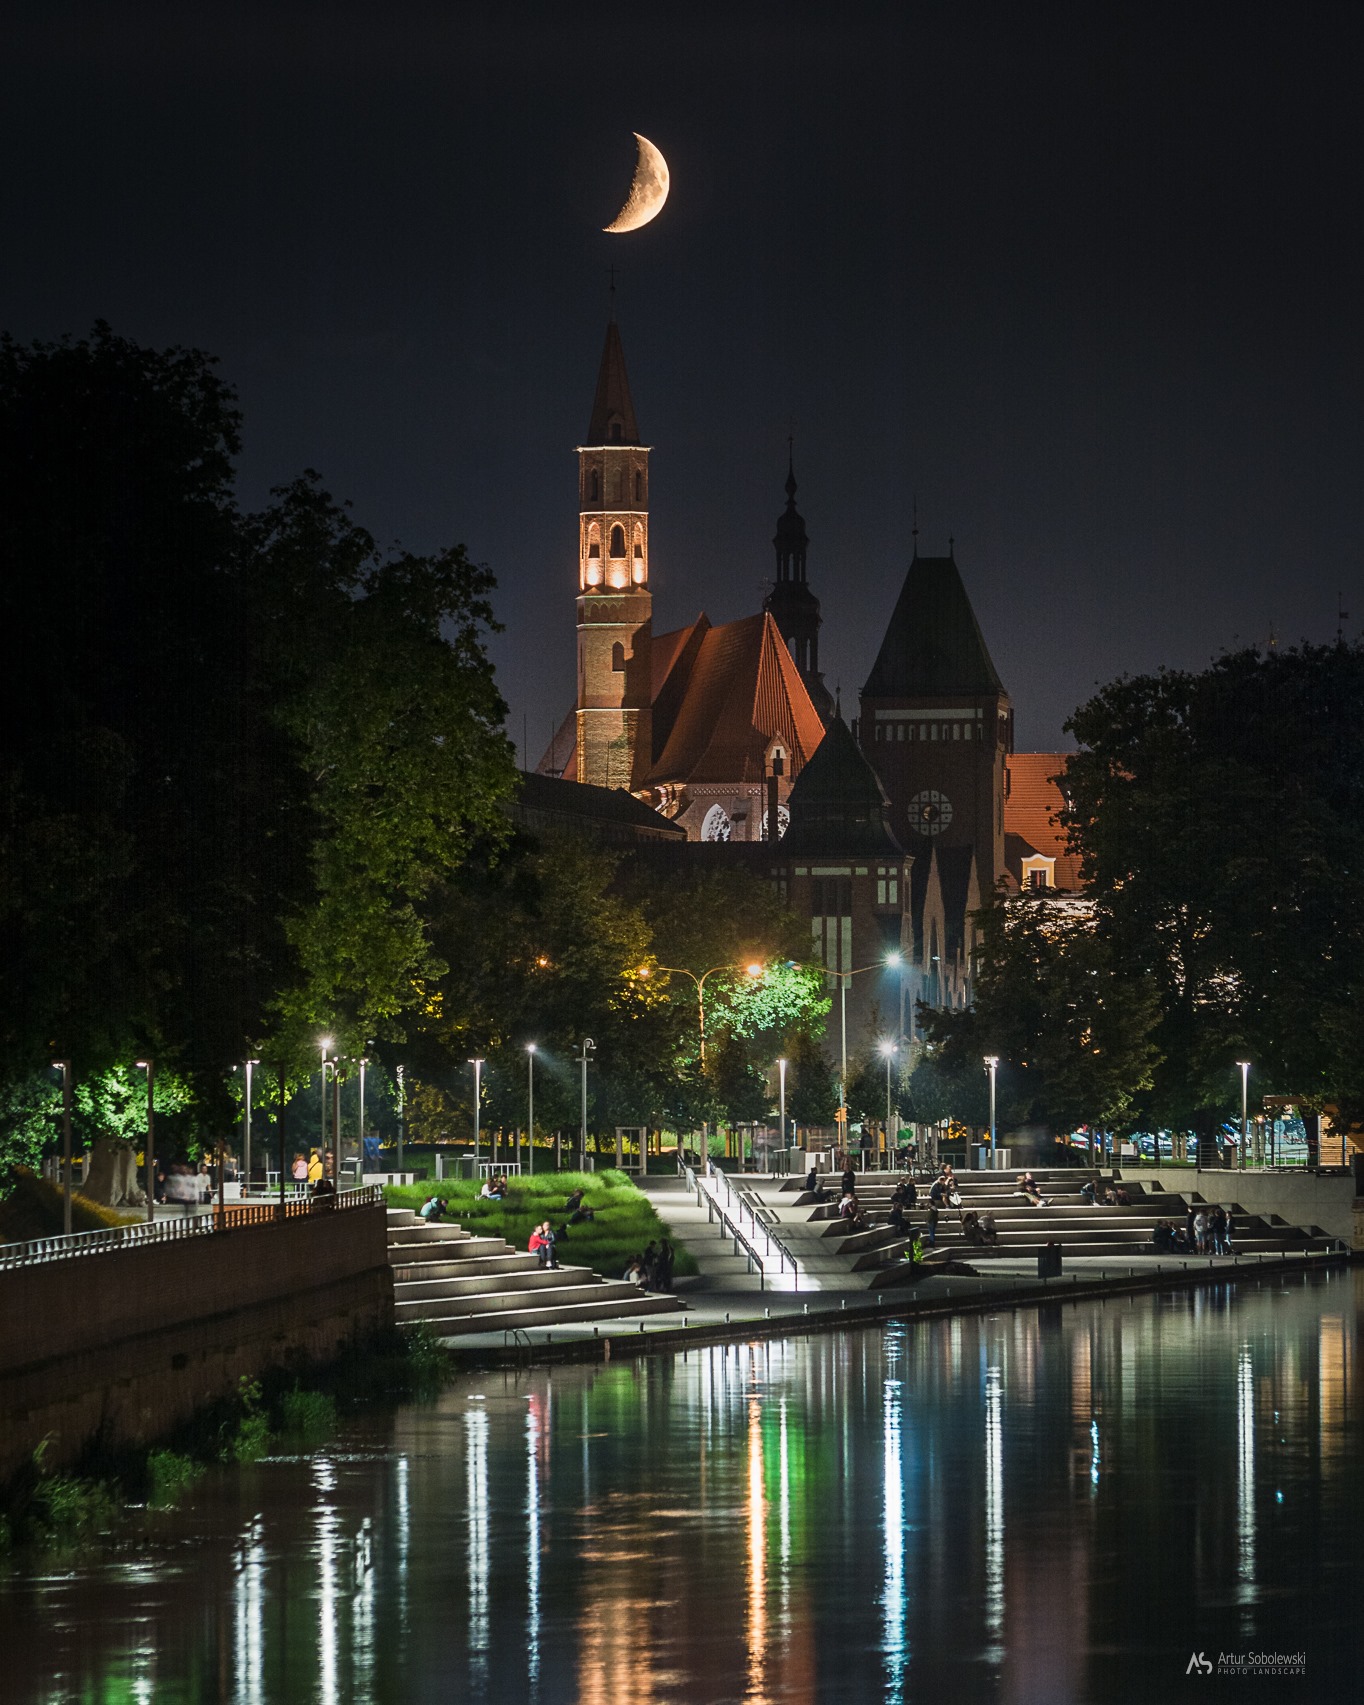 General 1364x1705 architecture building old building castle wrocław Poland portrait display night river reflection Moon crescent moon